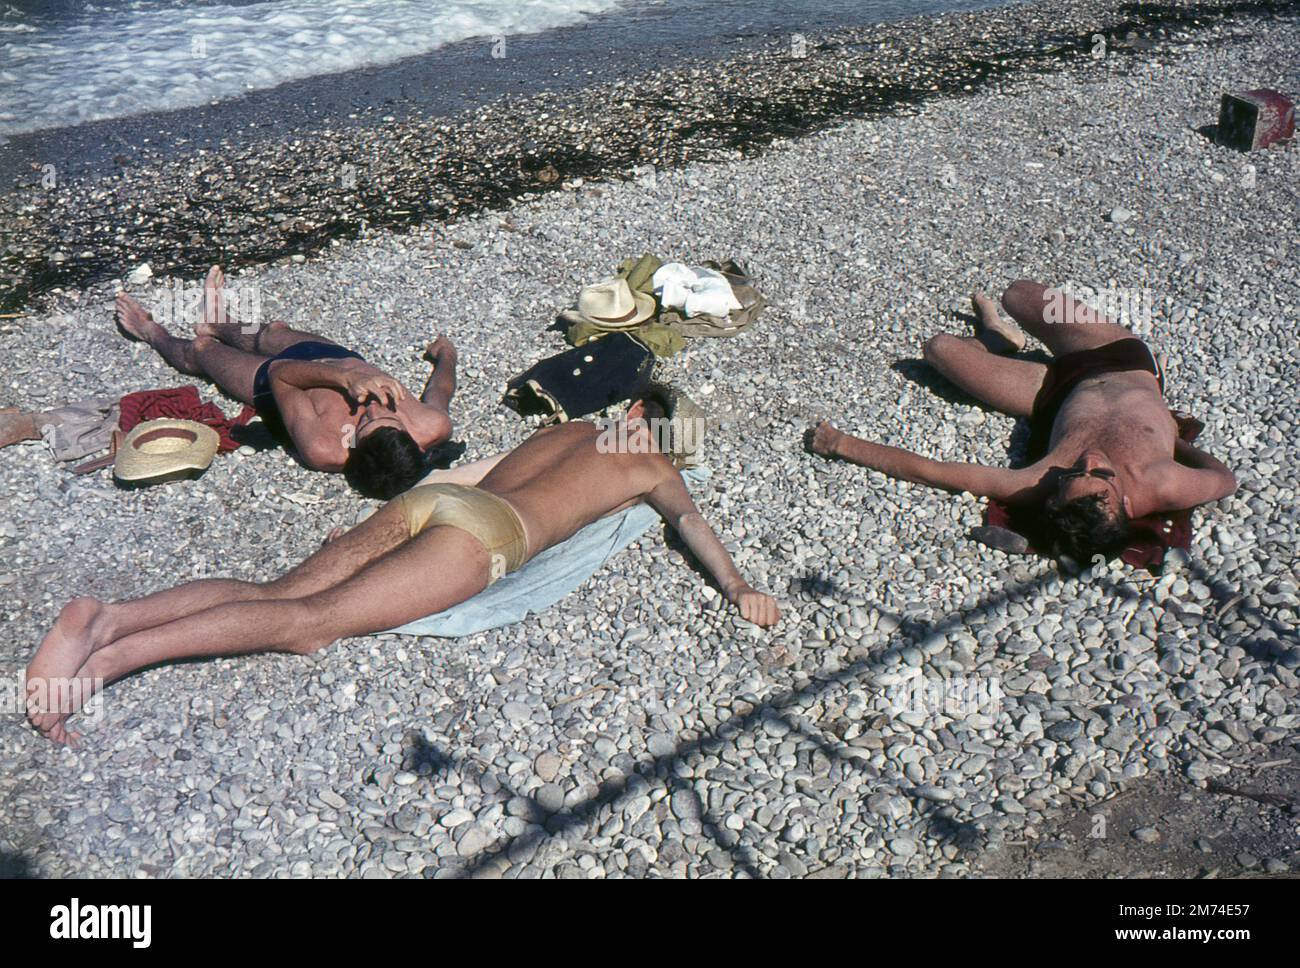 Xylokastro, Greece. August 1963. Three young men wearing swimming trunks are sunbathing on the shingle beach at the seaside town of Xylokastro in Corinthia in the Peloponnese, Greece. The beach showers are casting an interesting shadow on the pebbles. Stock Photo